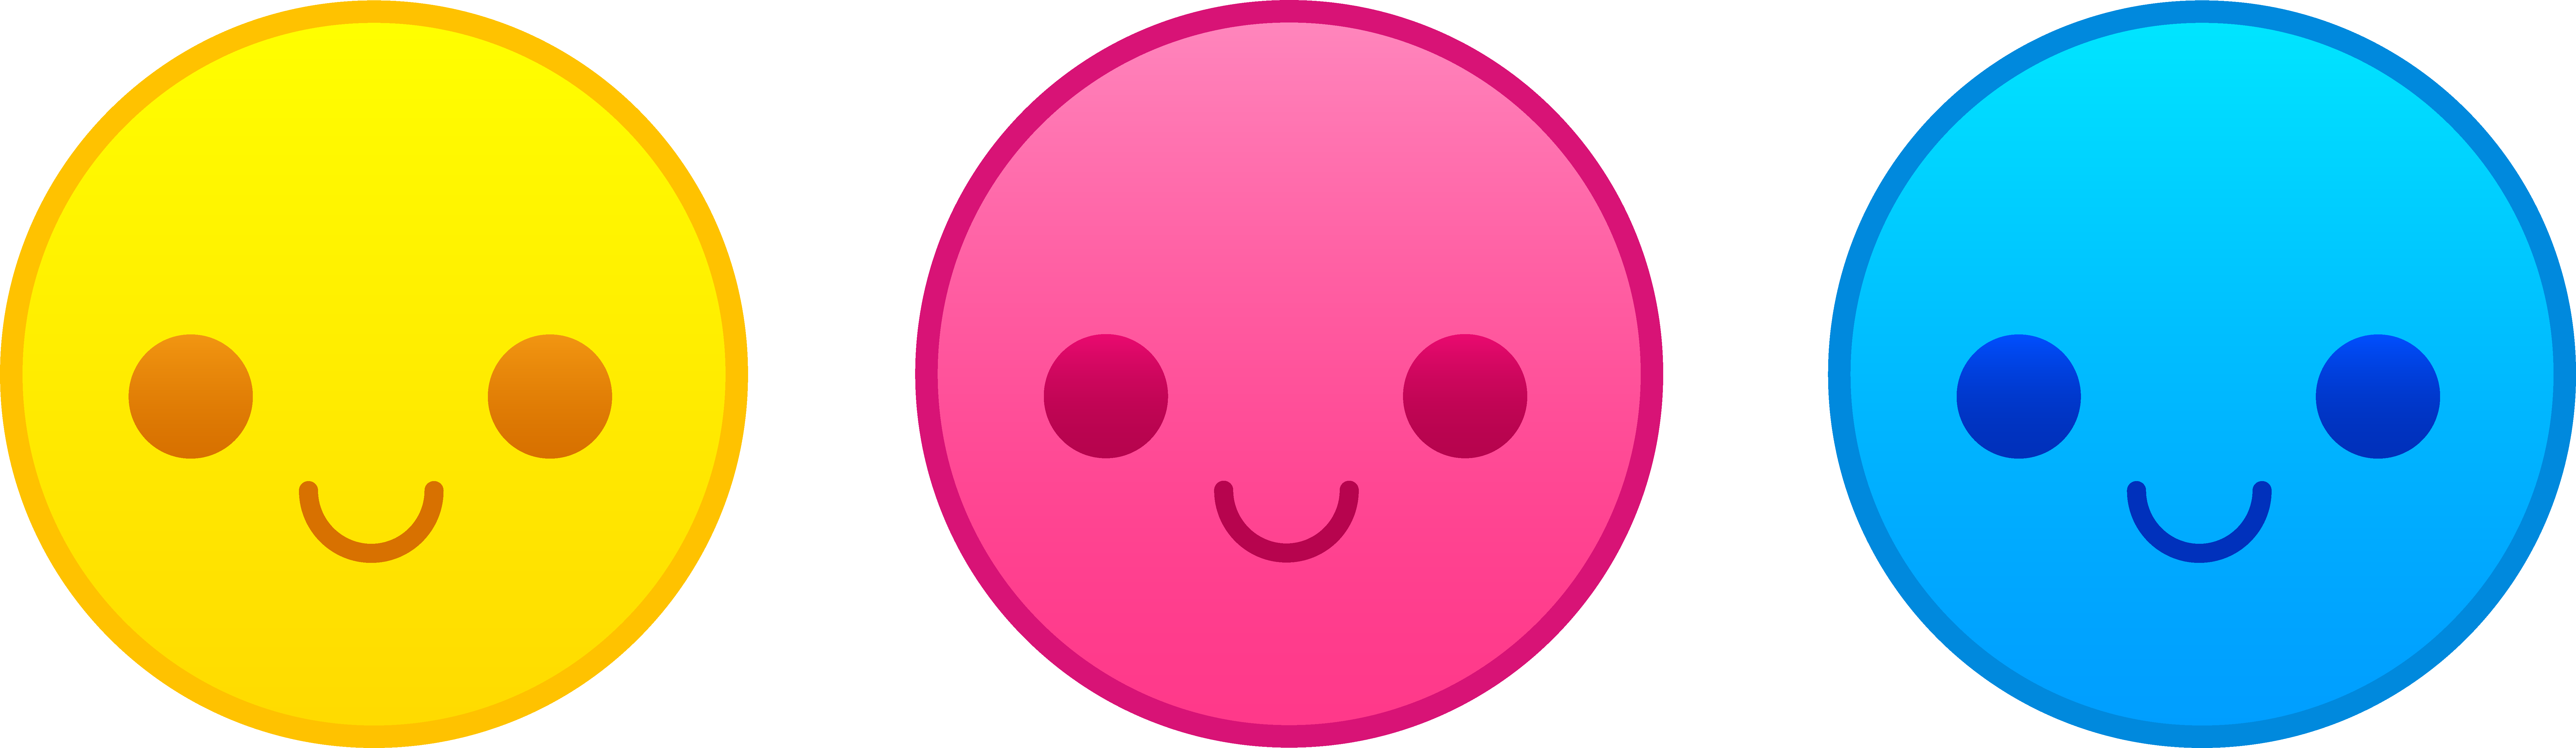 Emoticon Happy Face Images & Pictures - Becuo